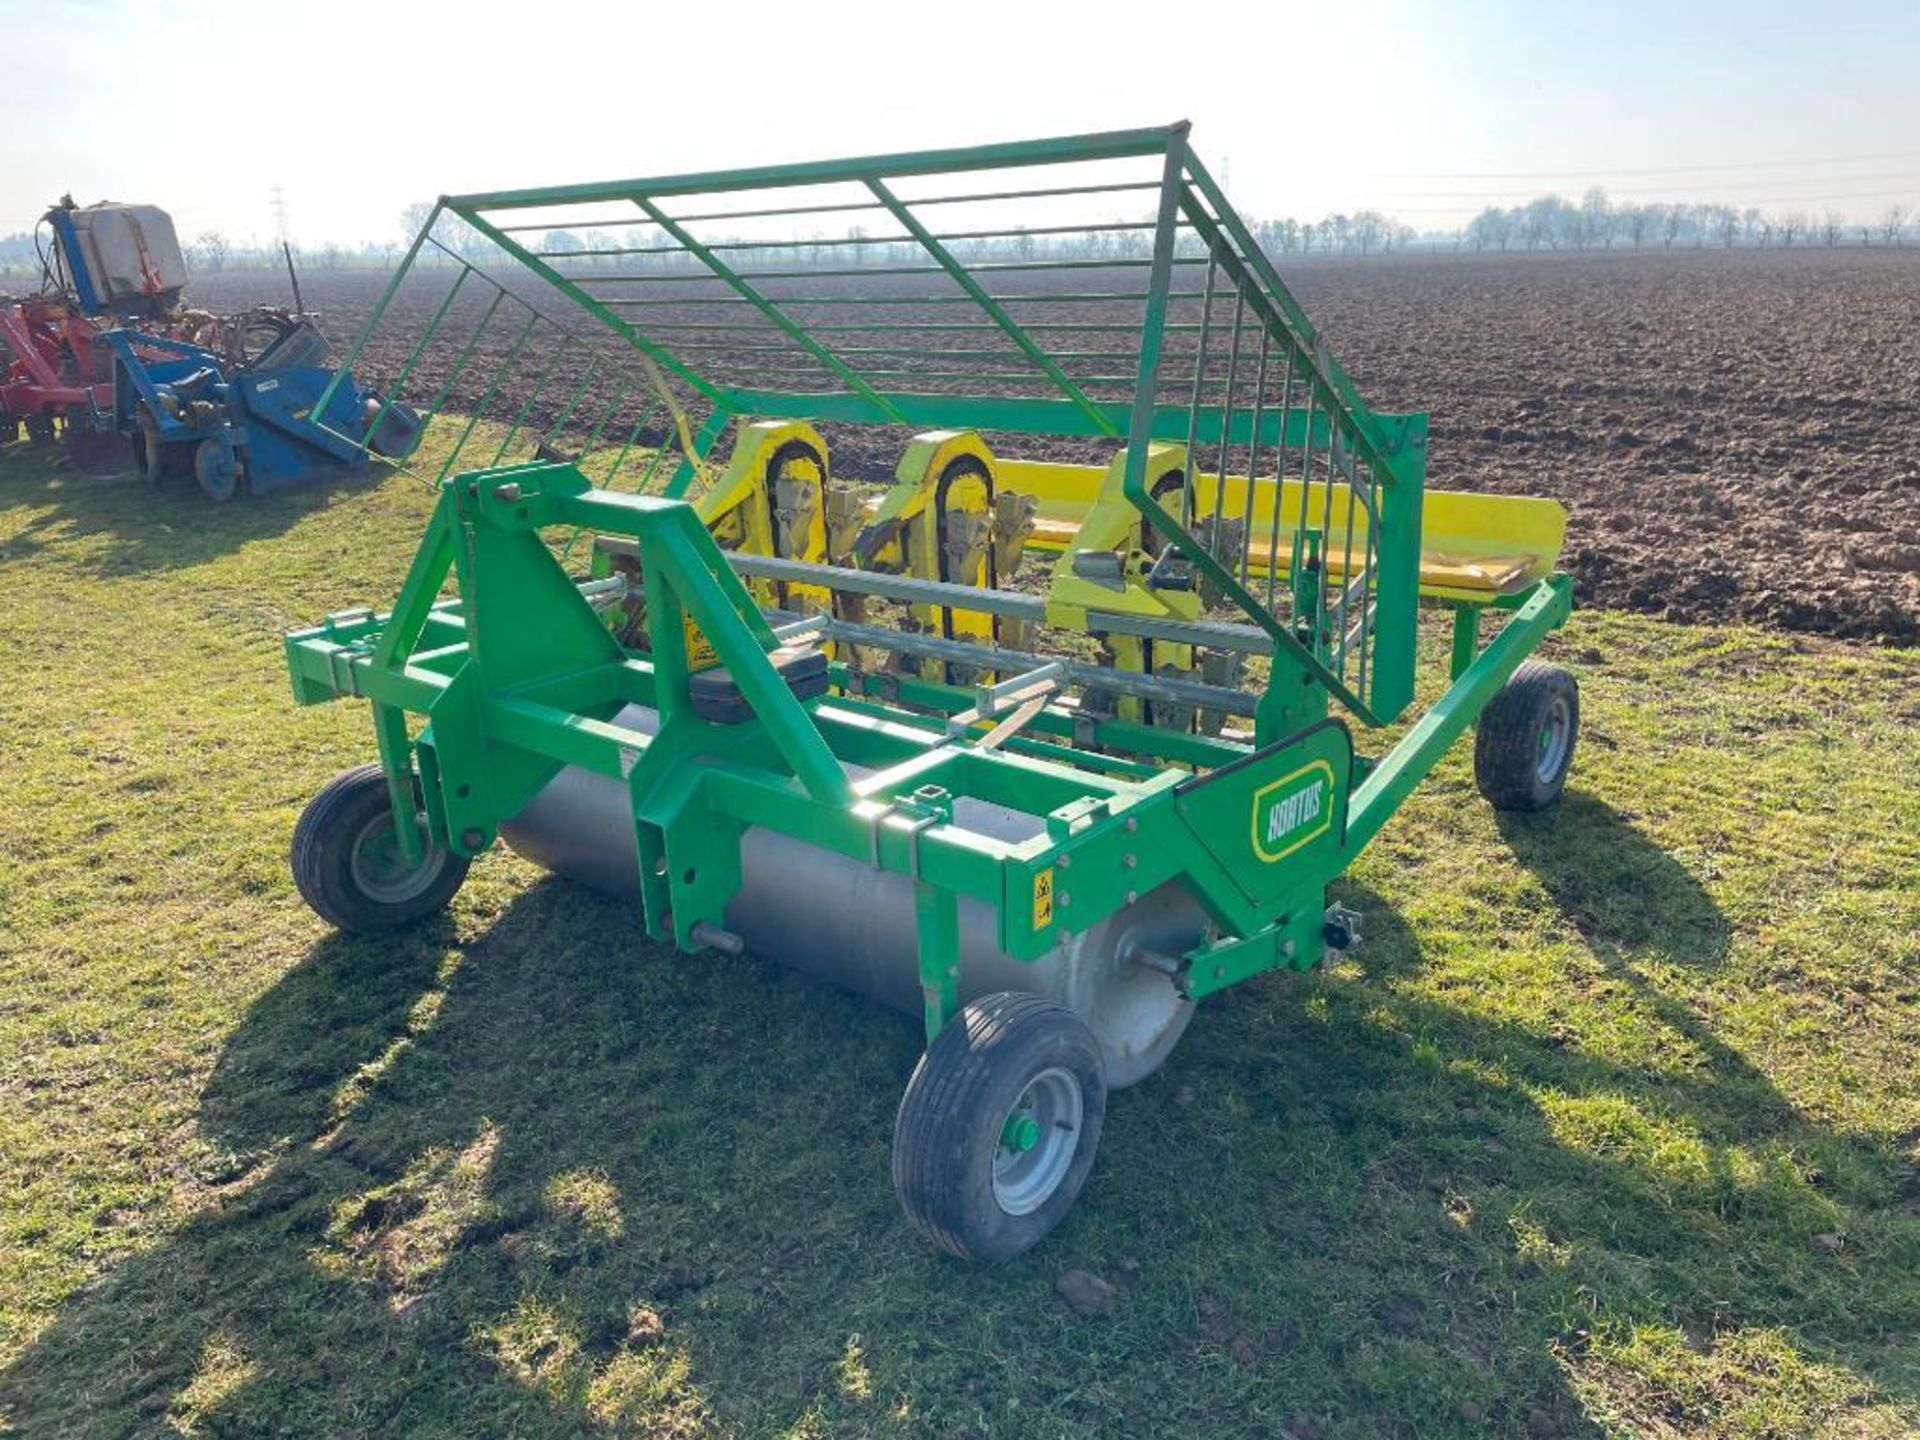 2006 Hortech Hortus Due H2 192 manual 3 row planter for large seeds, modules & nursery stock with po - Image 7 of 11